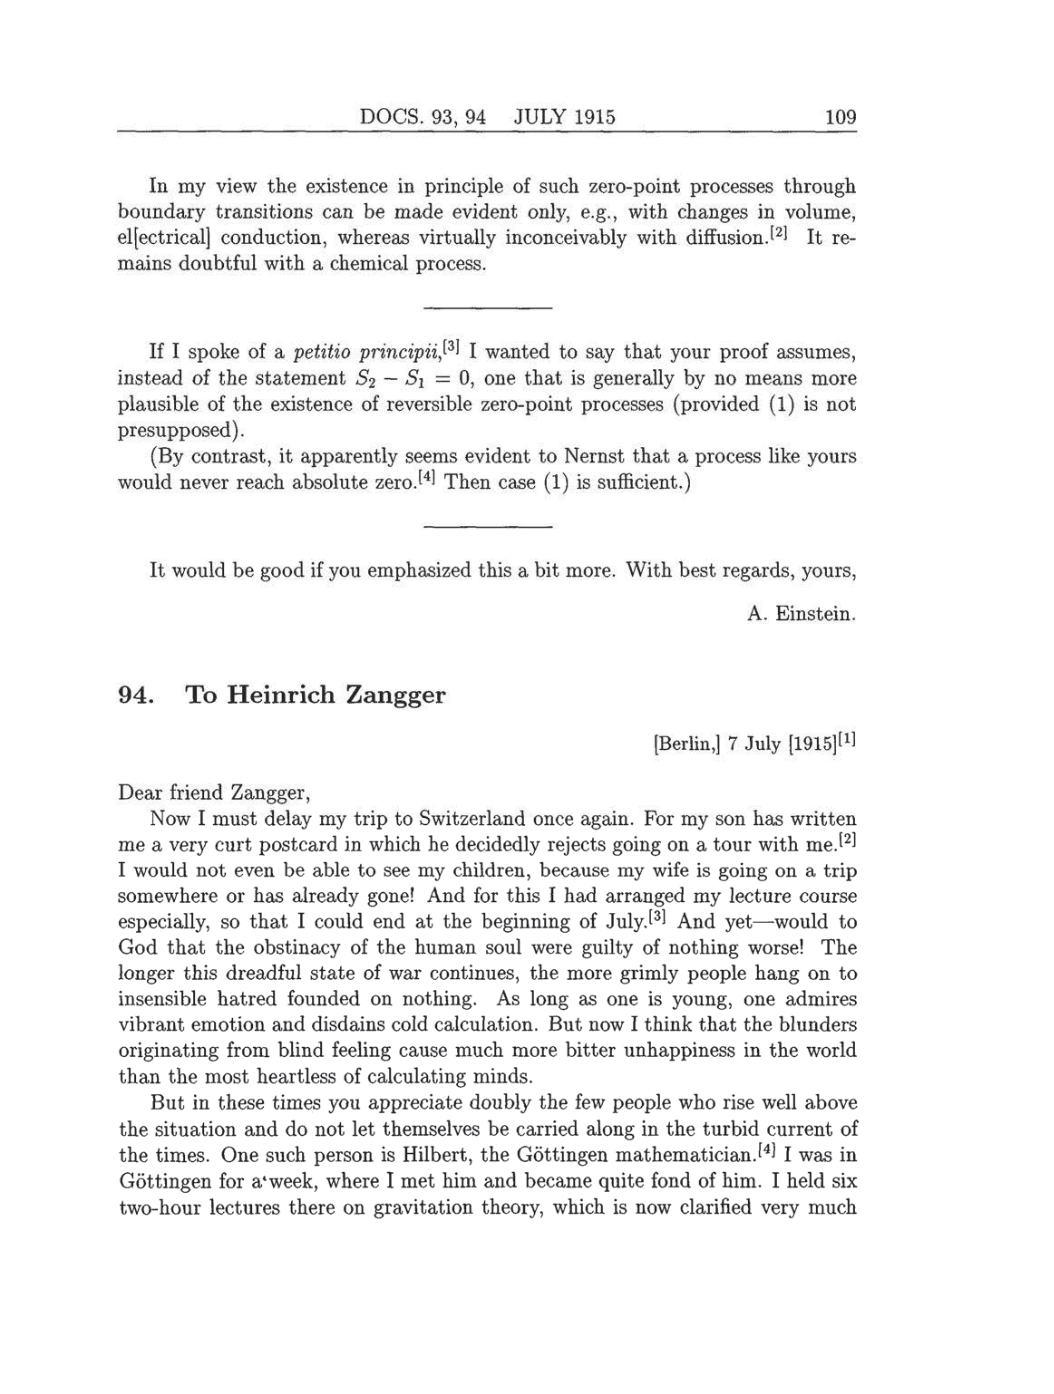 Volume 8: The Berlin Years: Correspondence, 1914-1918 (English translation supplement) page 109